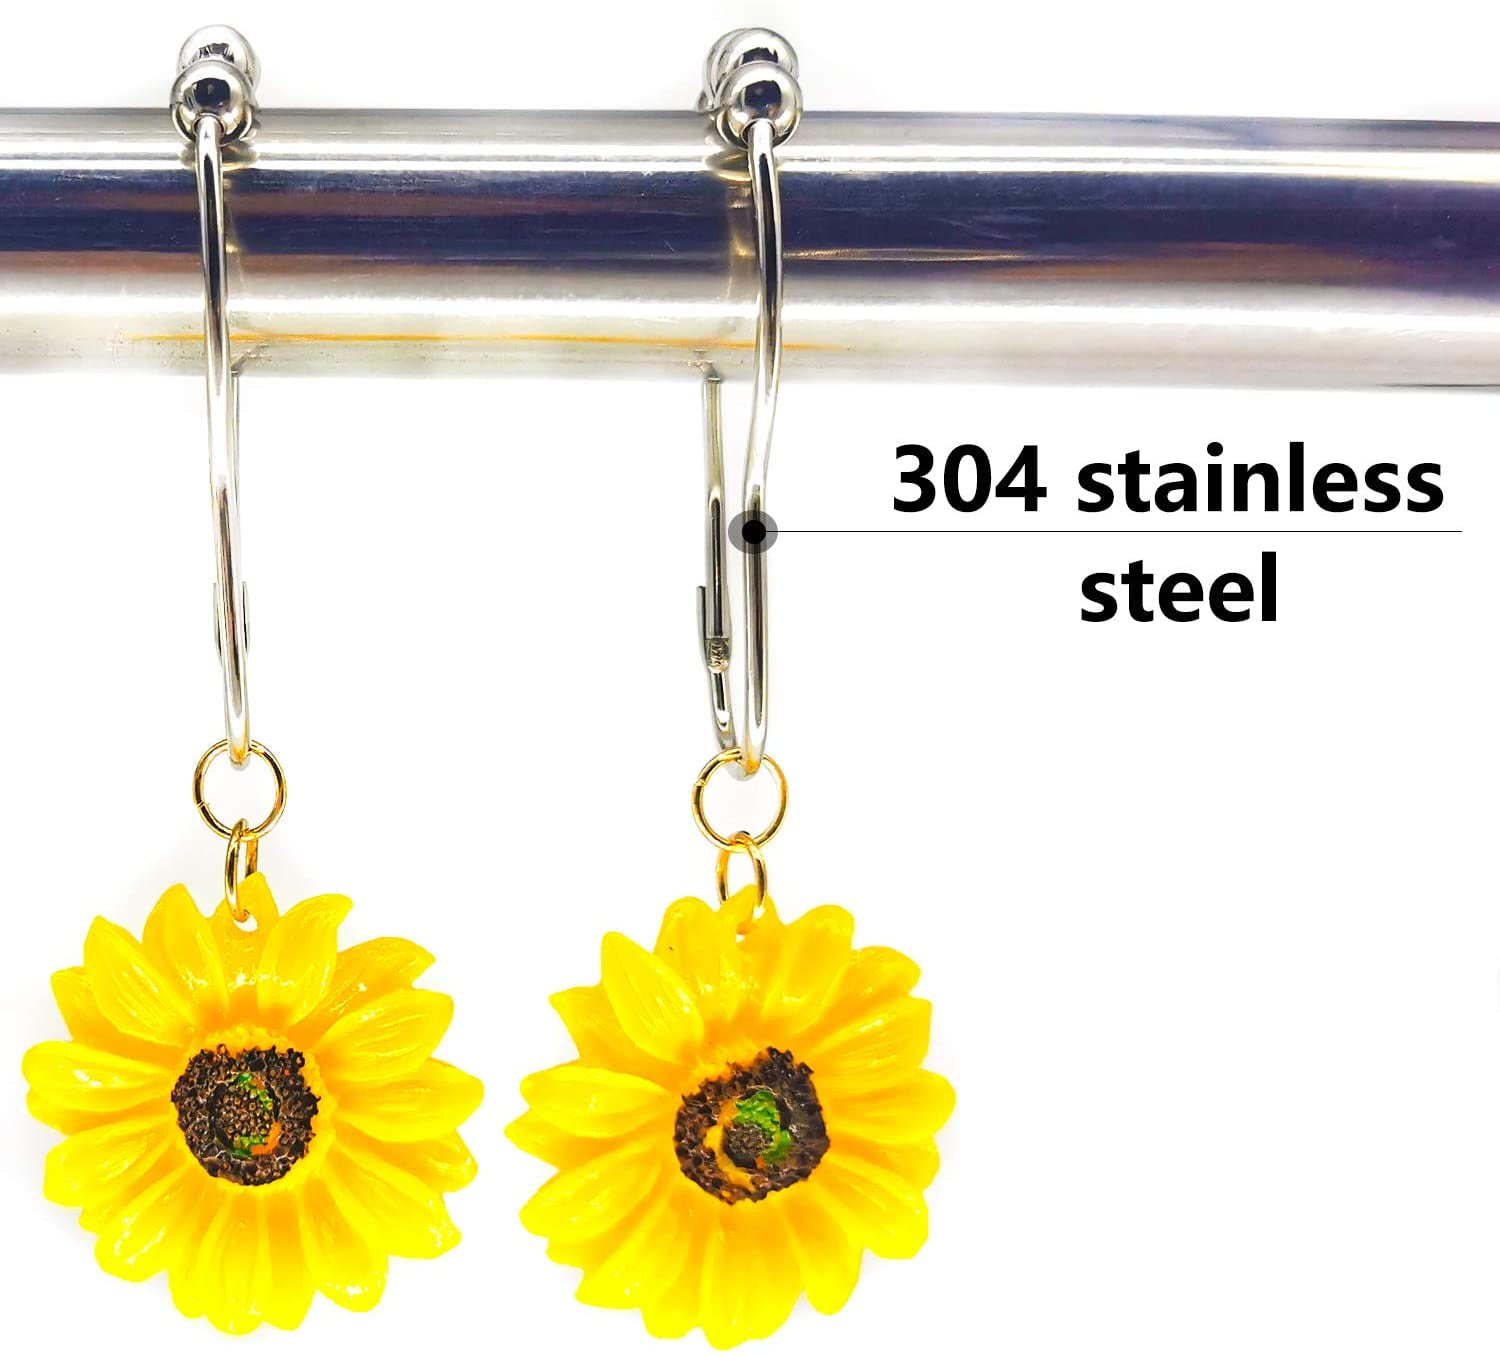 12Pcs 304 Stainless Steel Shower Curtain Rings and Hooks for Bathroom Shower Rodshooks & Liners Curtains-Yellow & Black Sunflower Shower Curtain Rings Hooks